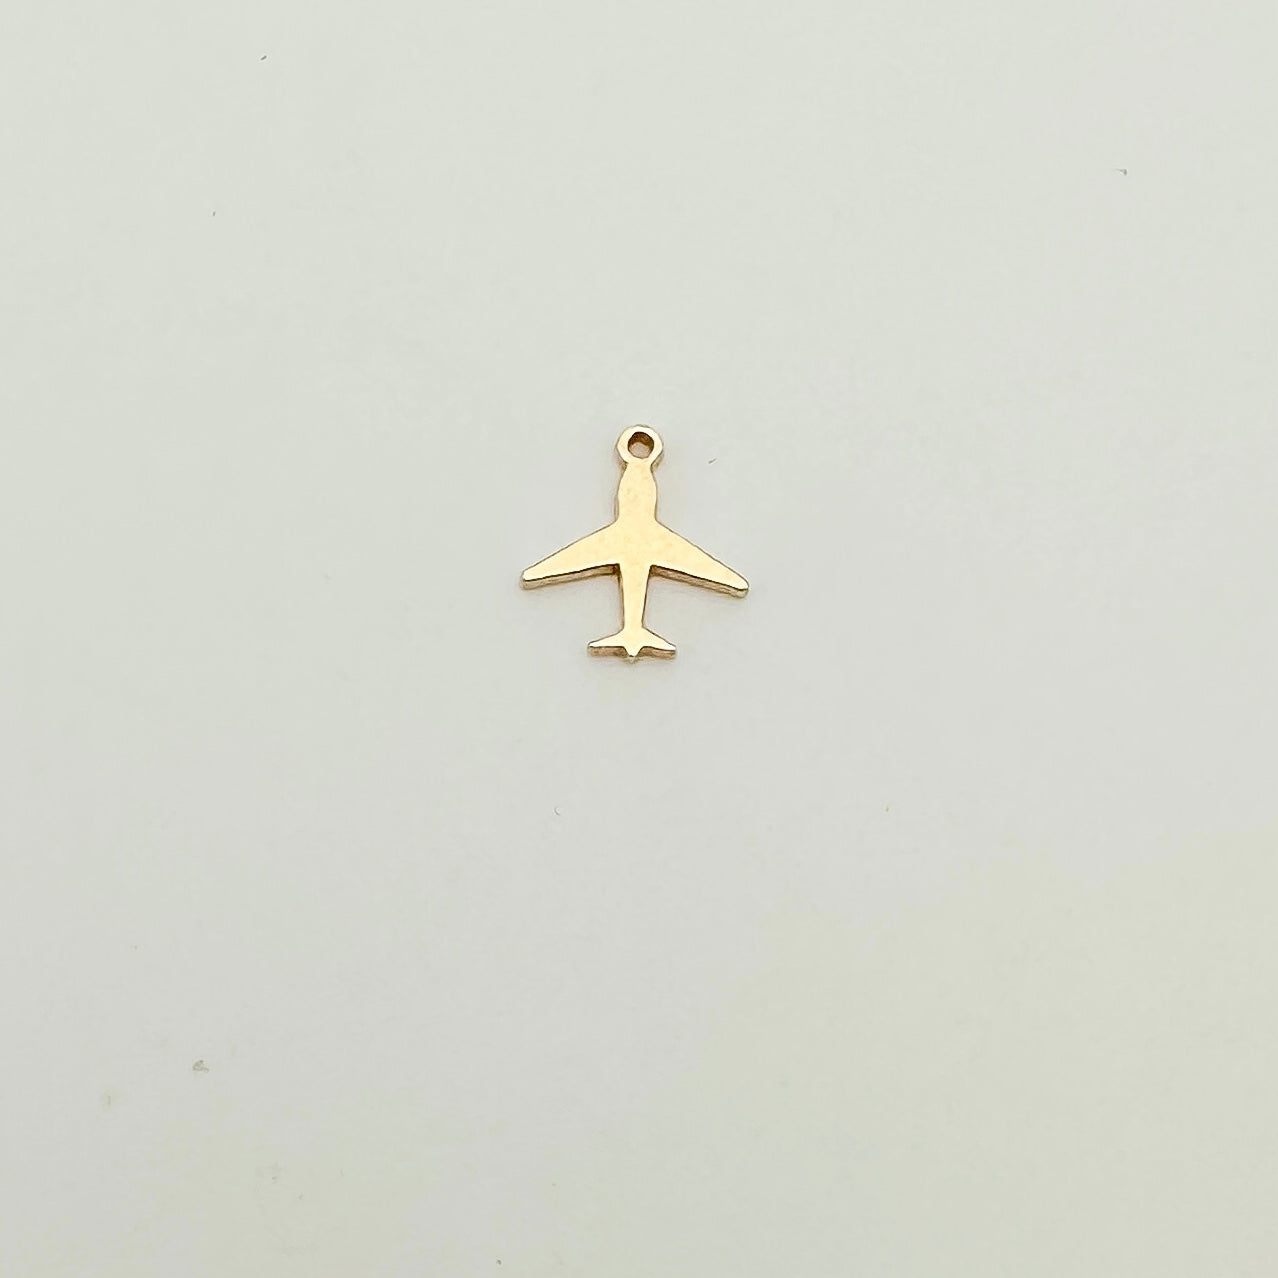 gold filled airplane connector, gold filled connectors, permanent jewelry connectors, essbe jewelry supply, permanent jewelry supplier, airplane charm, airplane connector, sterling silver airplane charm